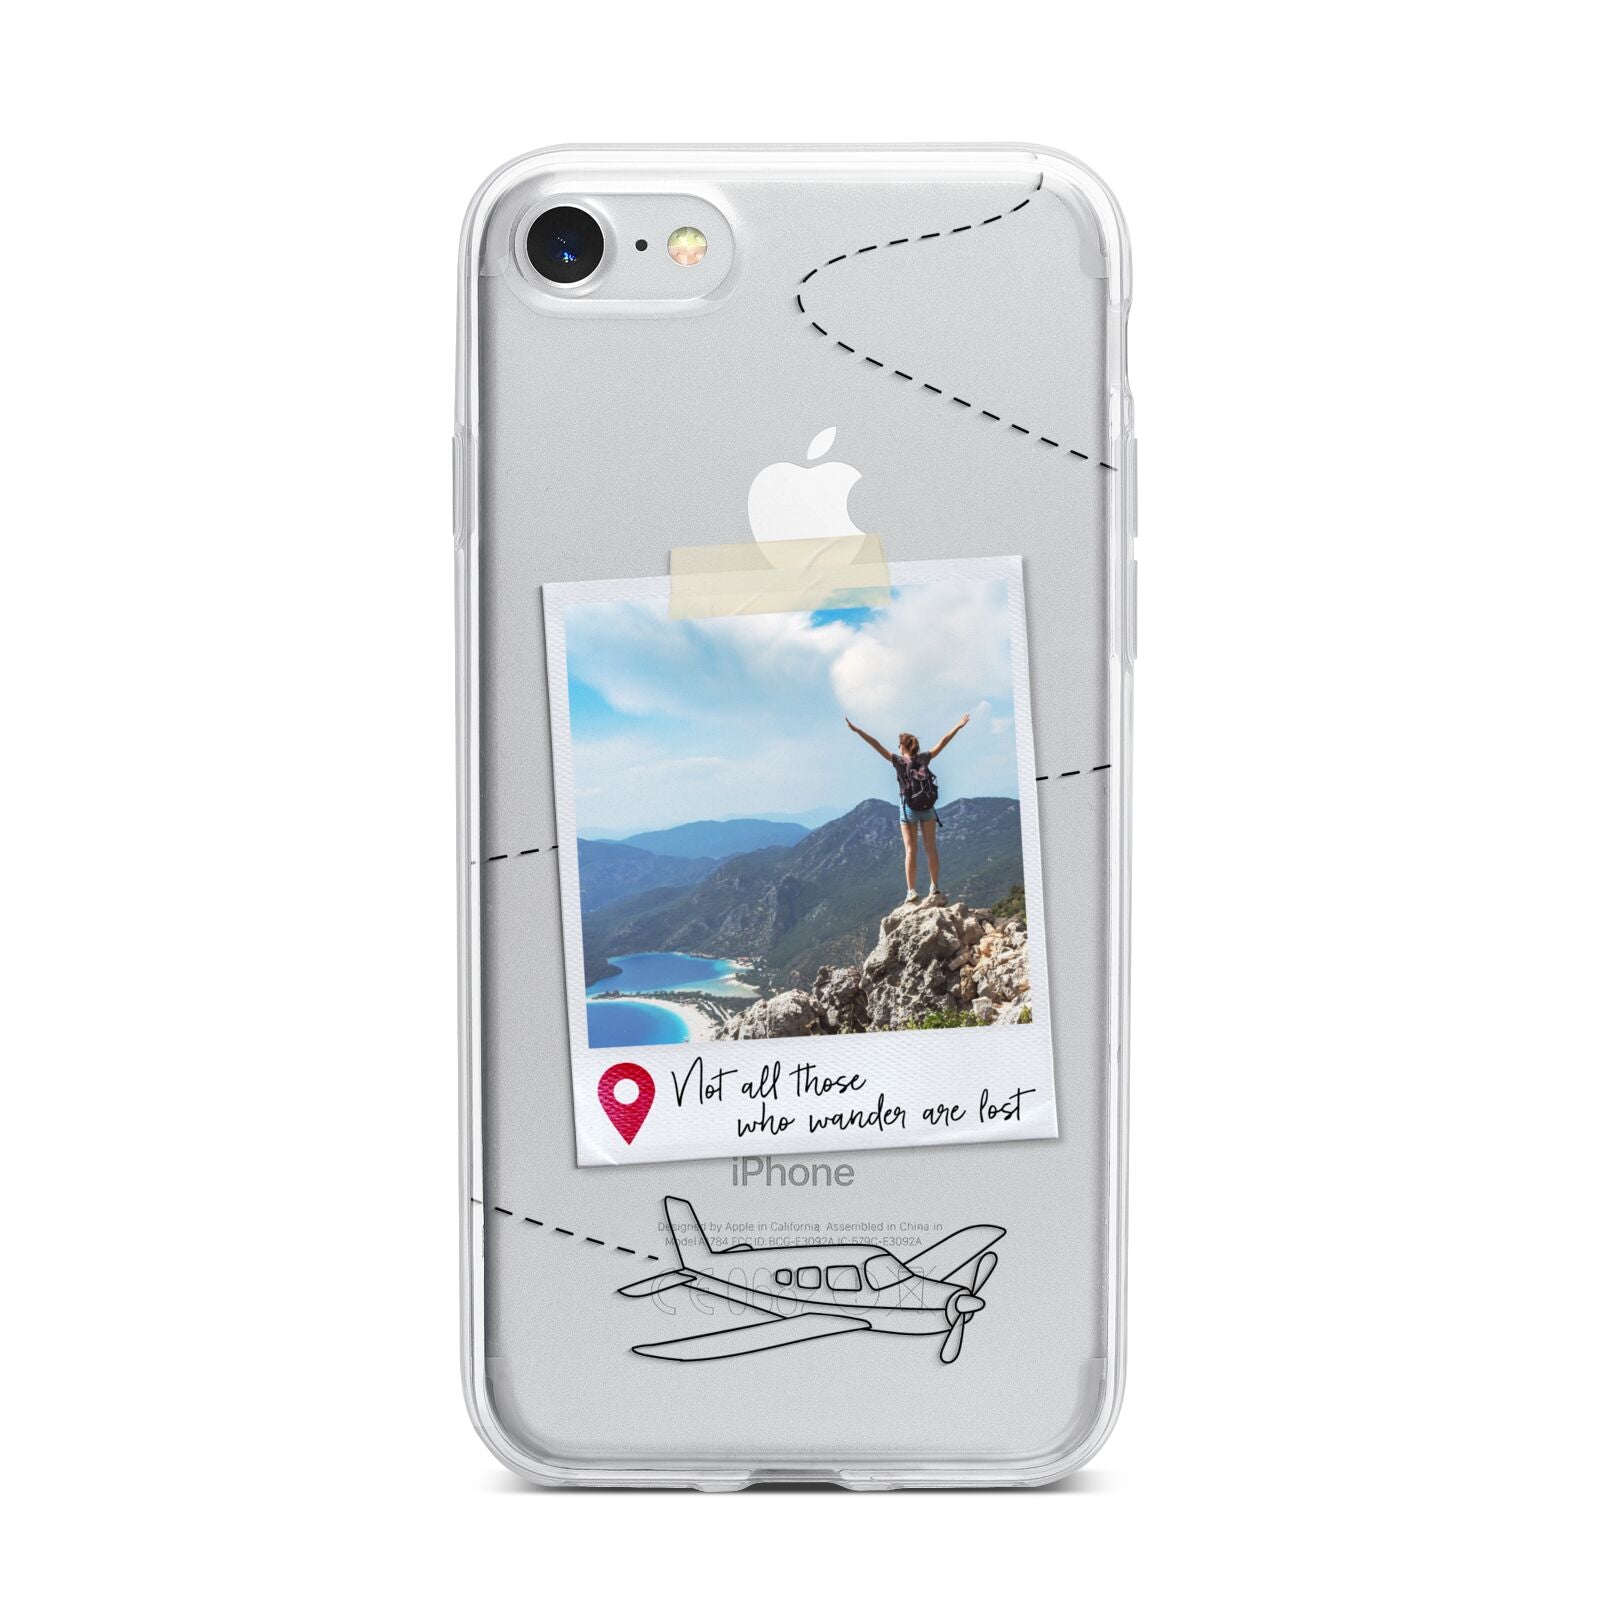 Backpacker Photo Upload Personalised iPhone 7 Bumper Case on Silver iPhone